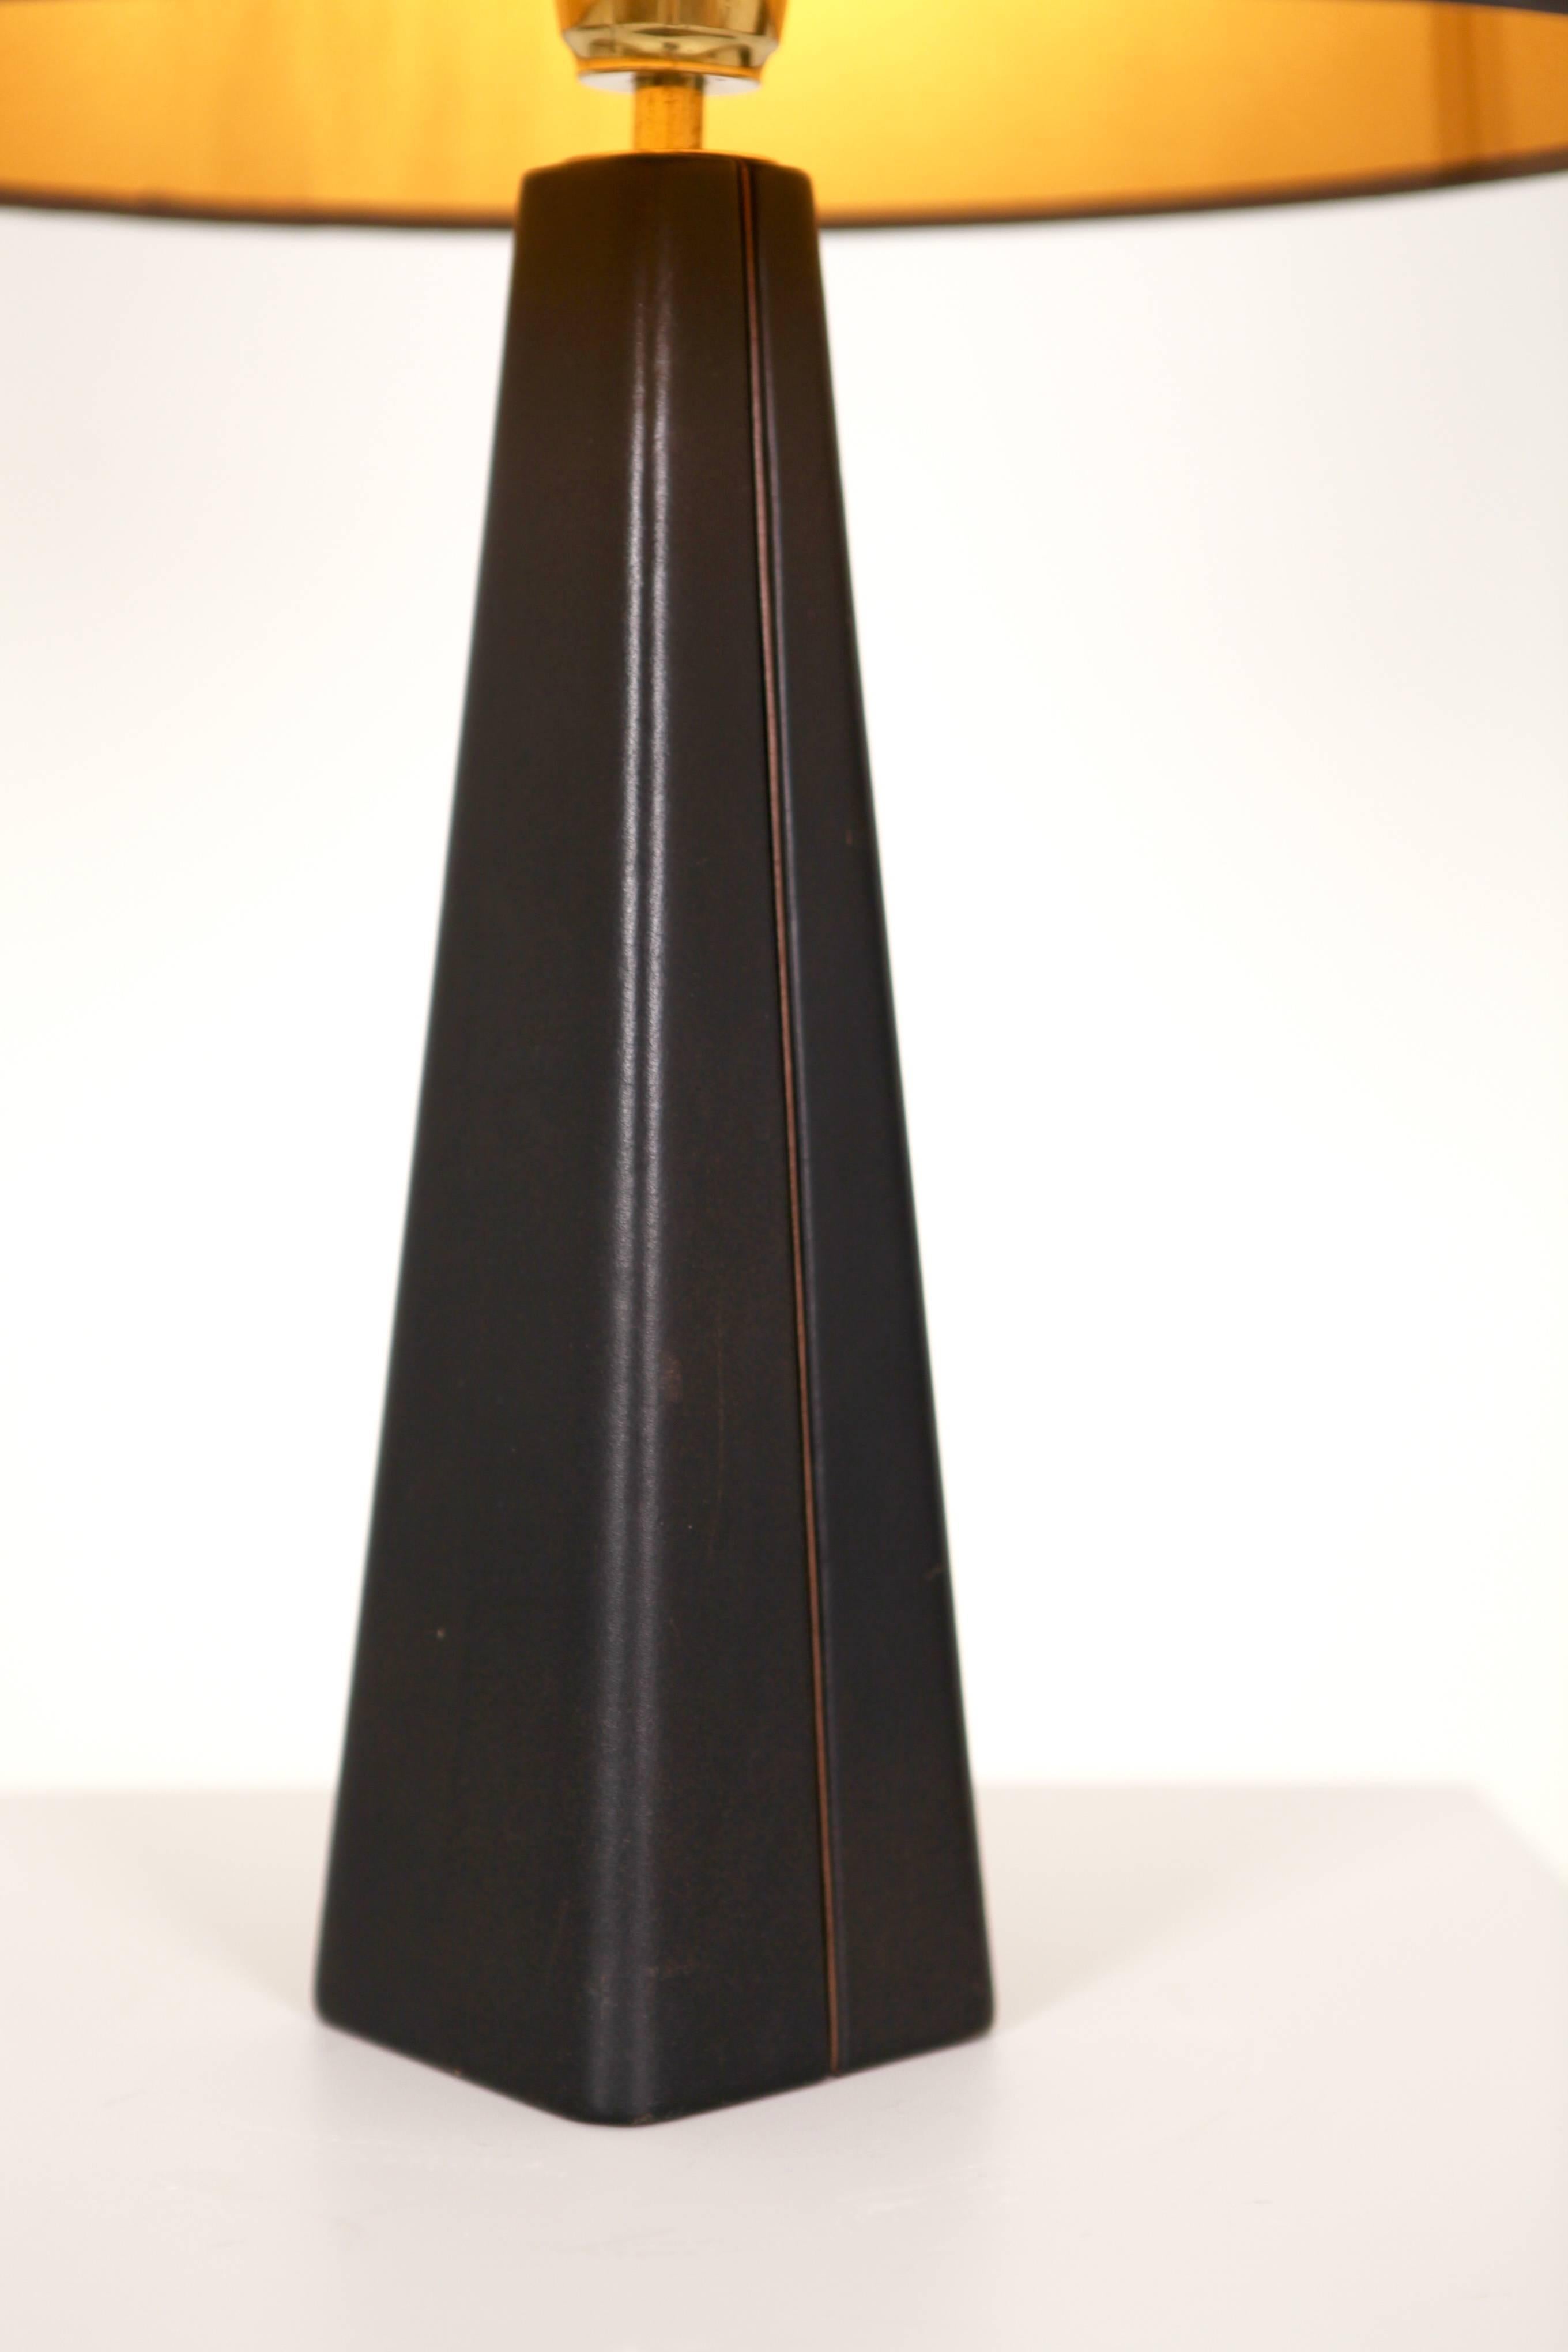 Lisa Johansson-Pape table lamp in dark brown and light brown detail leather,
Finland, 1960s.